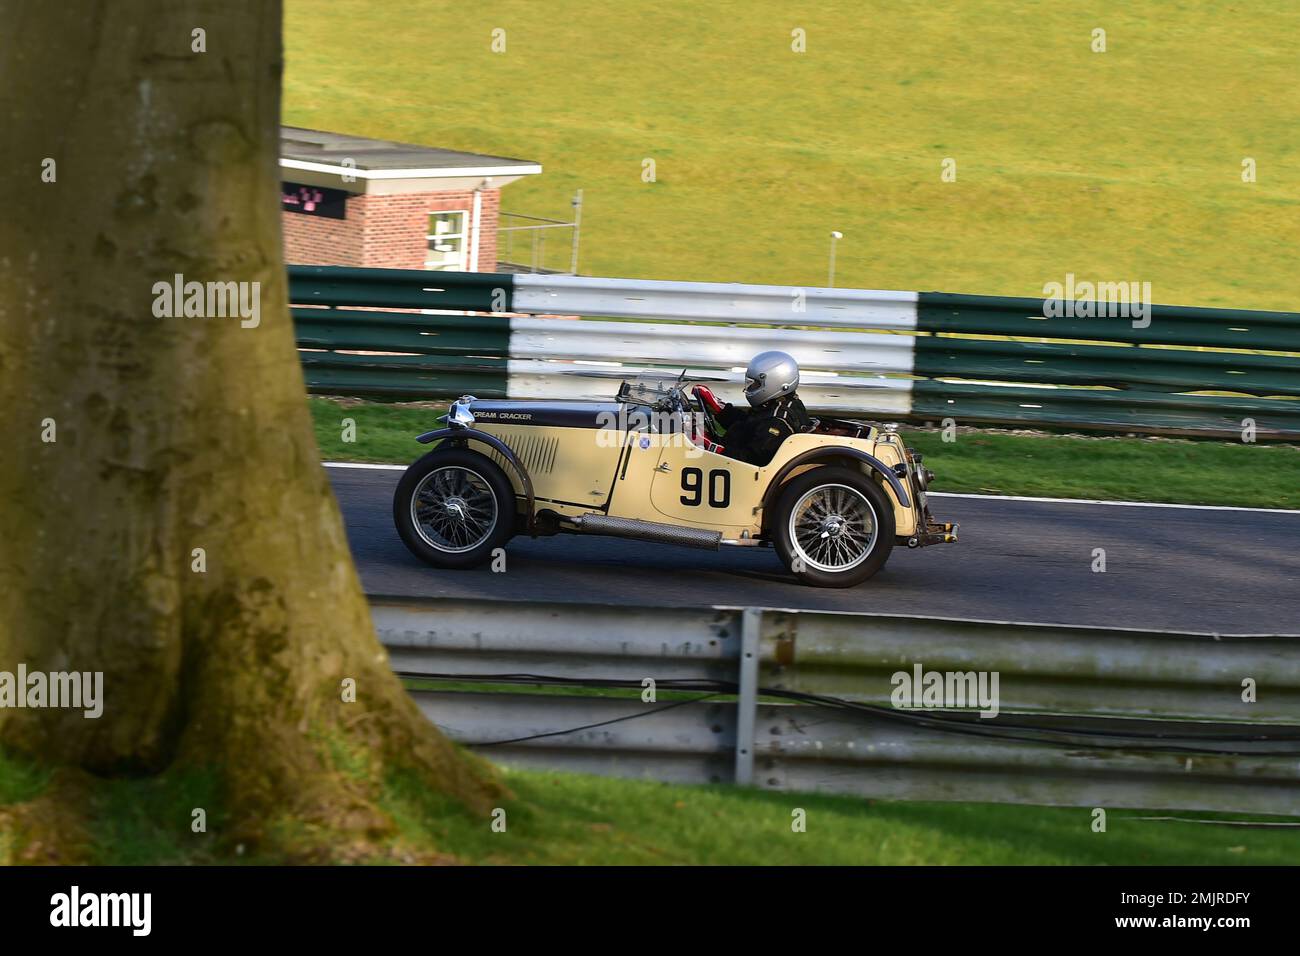 Andy King, MG PB Cream Cracker, Between the trees, Triple M Register Race for Pre-War MG Cars, fifteen minutes of racing for iconic MG Midget, Magna a Stock Photo